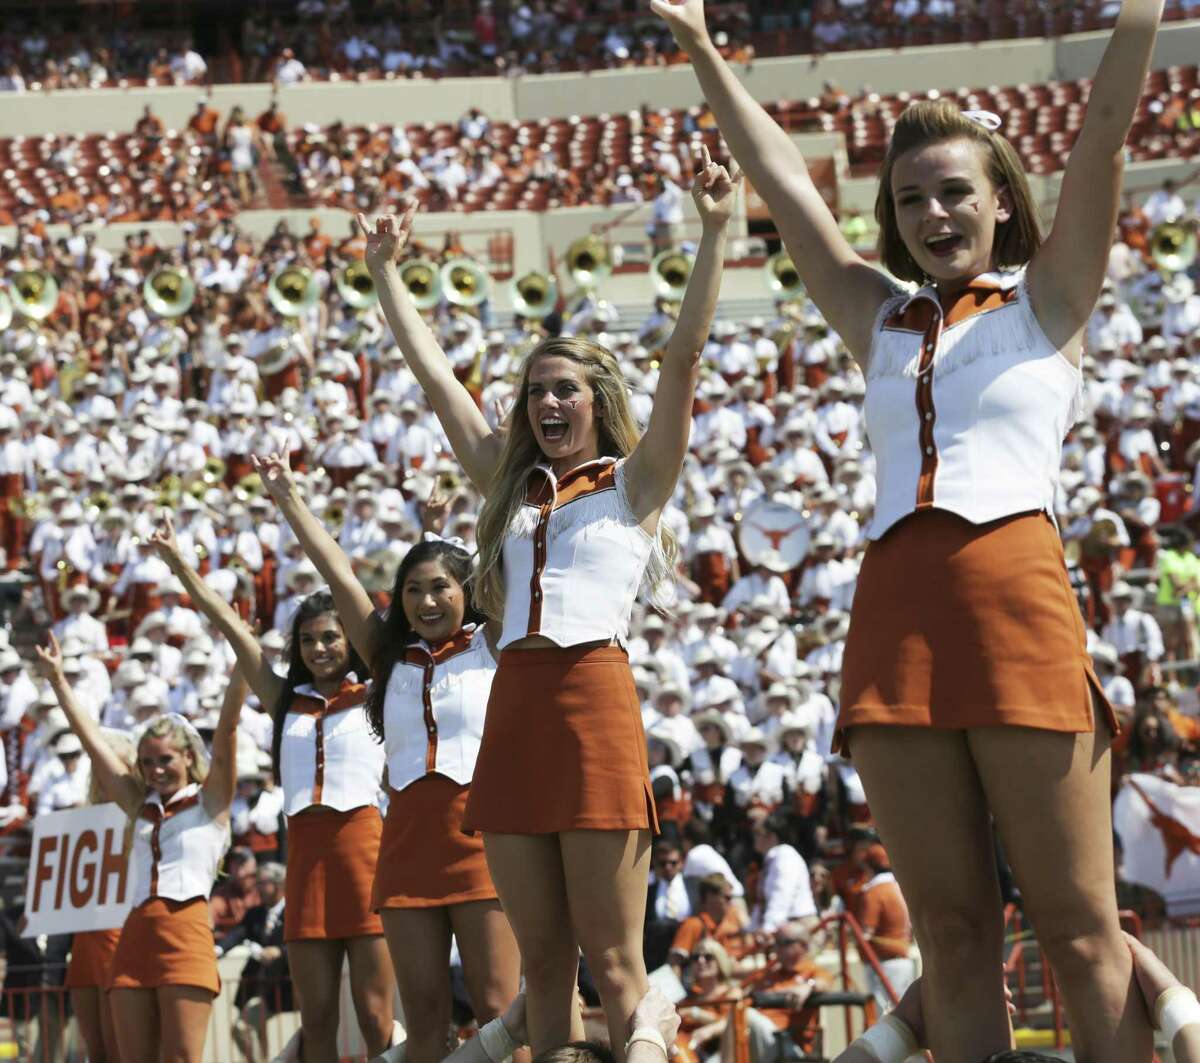 Cheerleaders get the fans roused as Texas plays Maryland at DKR Stadium on September 2, 2017.